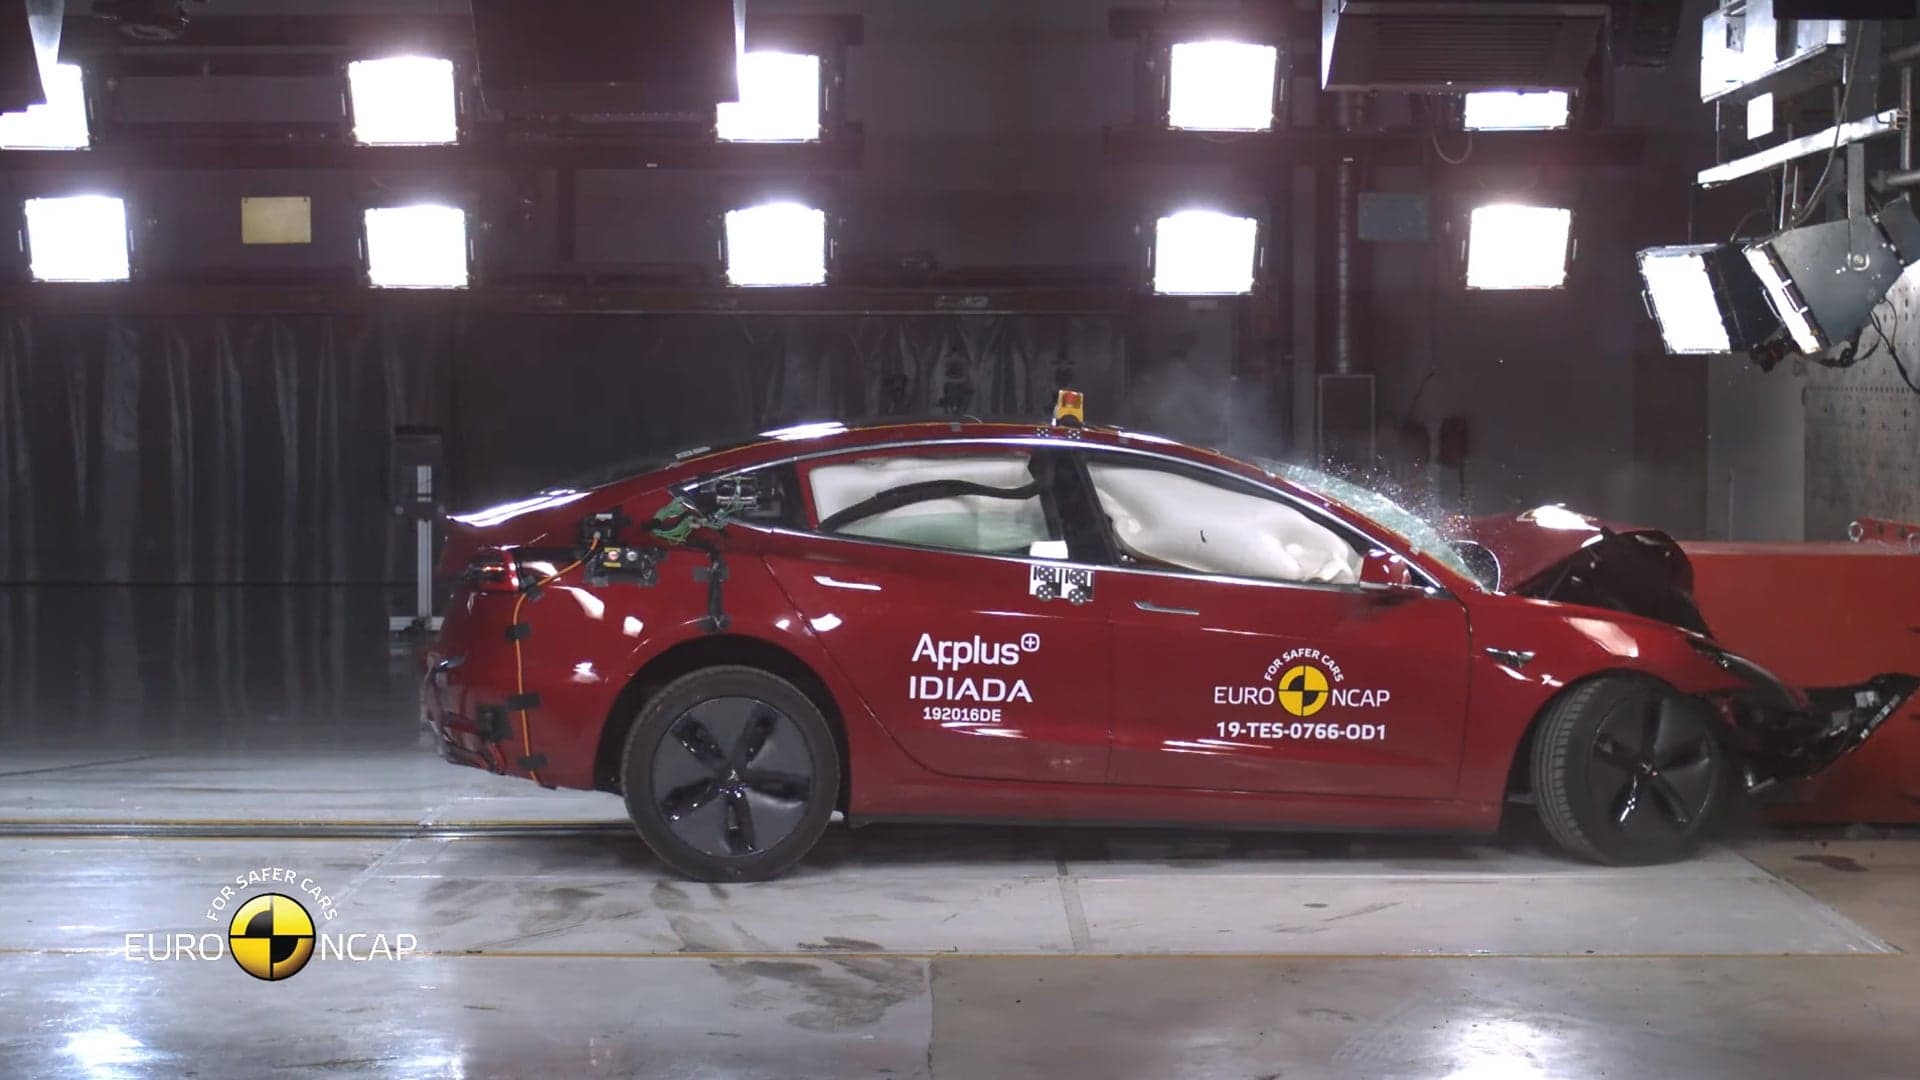 NHTSA Wants Tesla to Stop Telling Customers ‘Misleading’ Safety Information